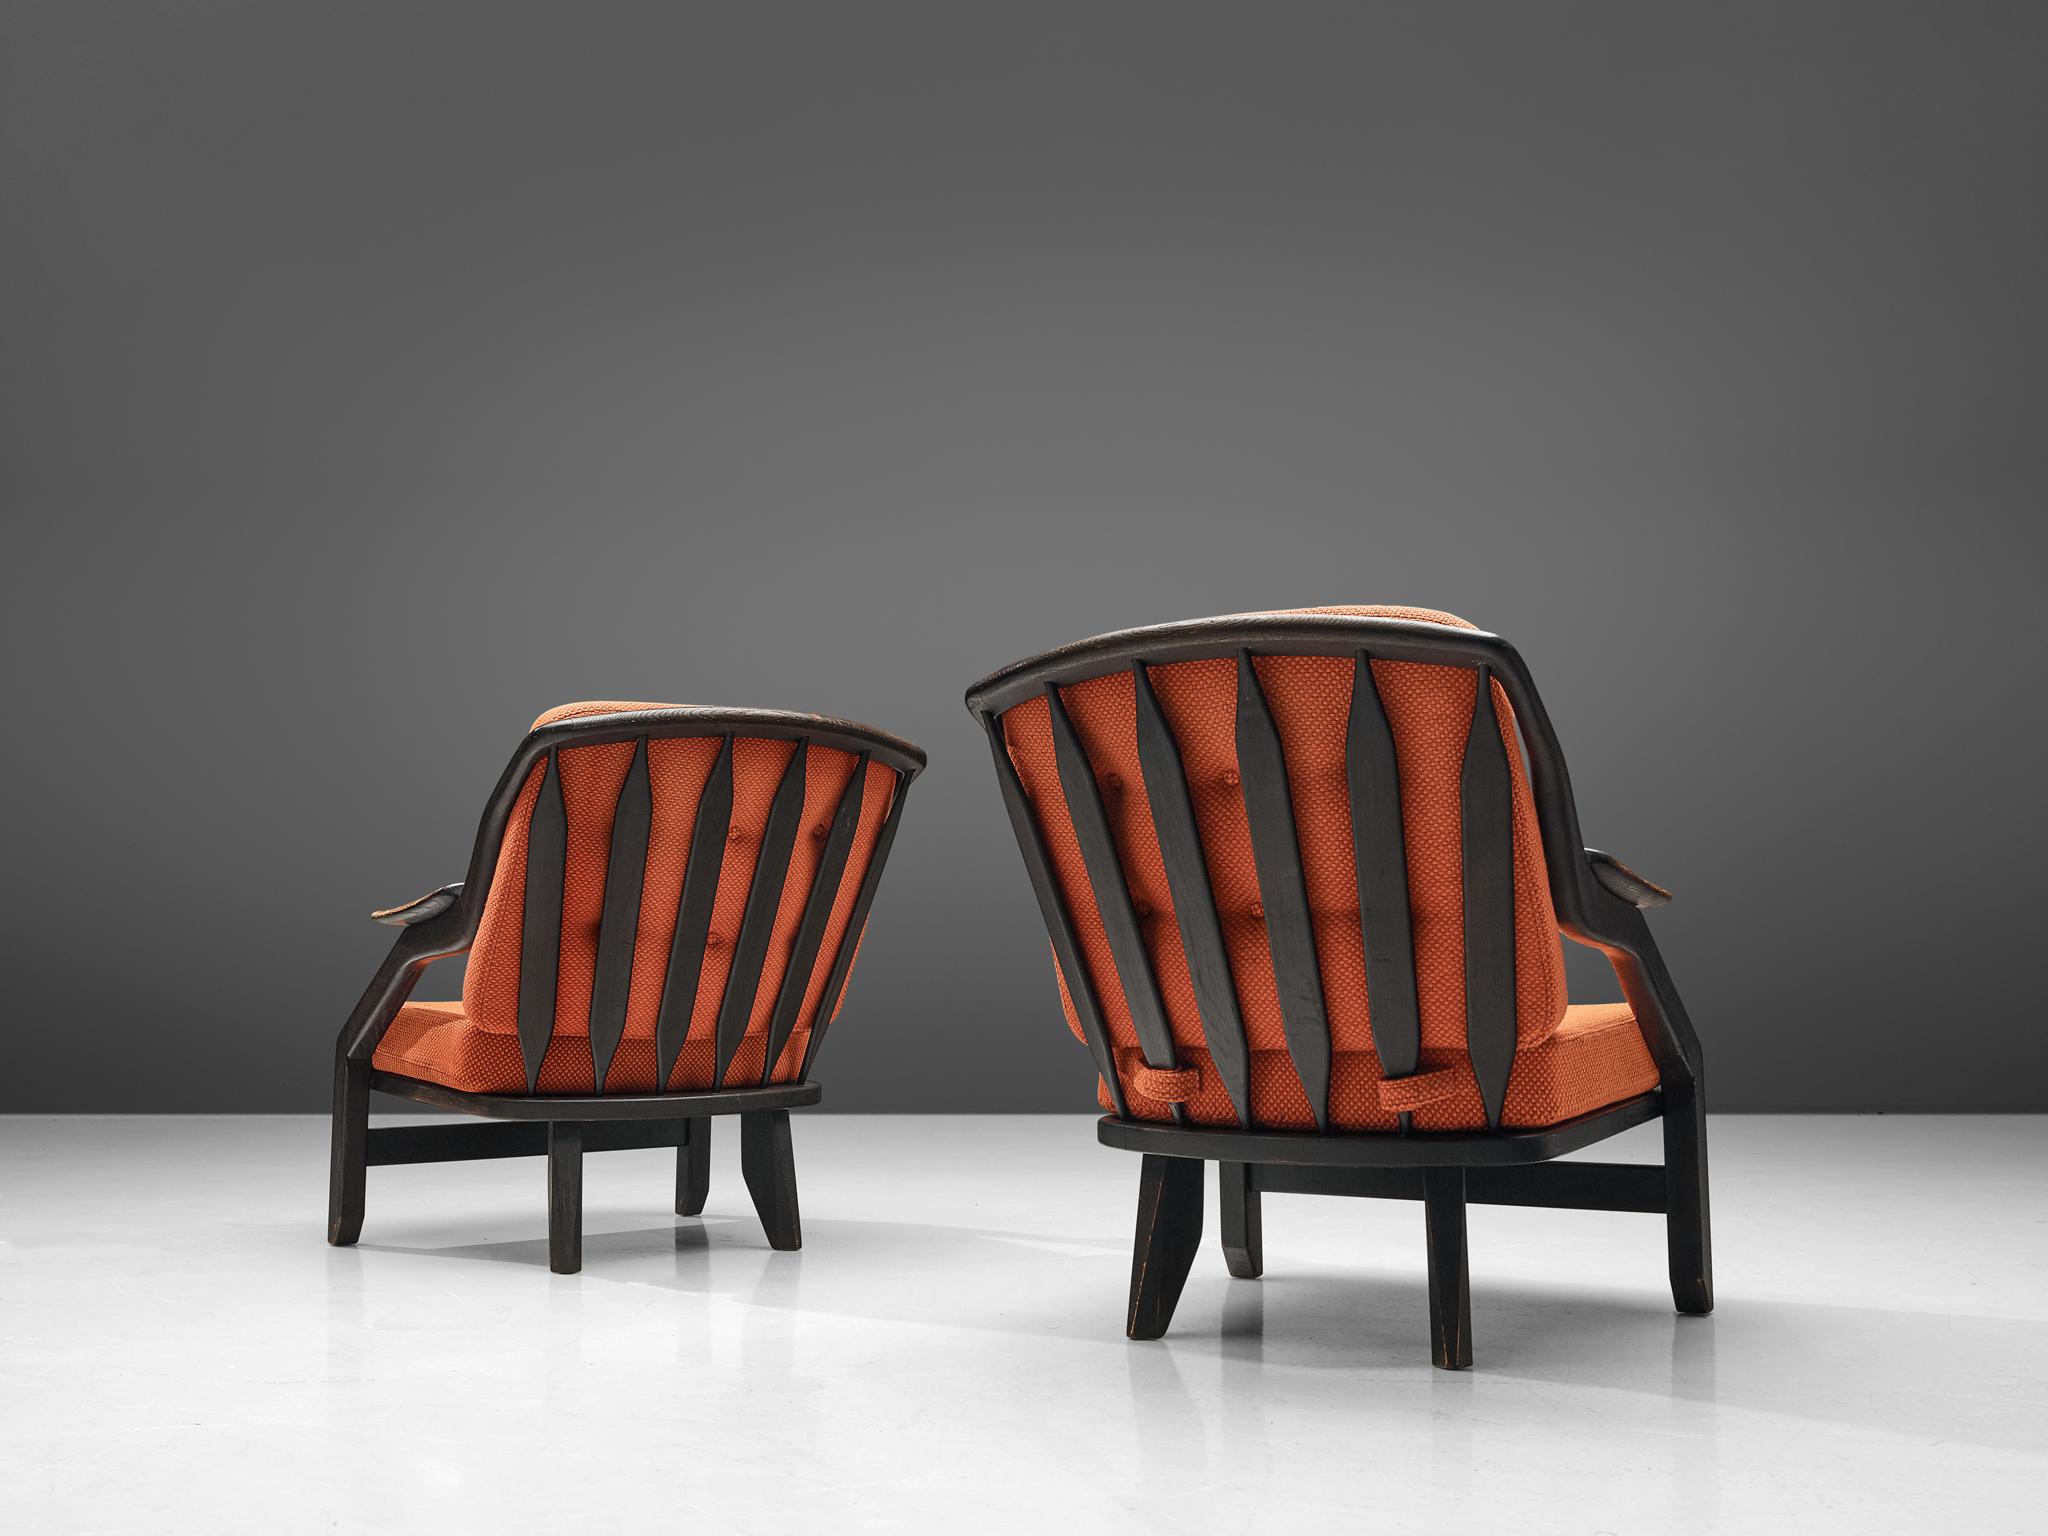 French Pair of Lounge Chairs with Orange Upholstery by Guillerme & Chambron